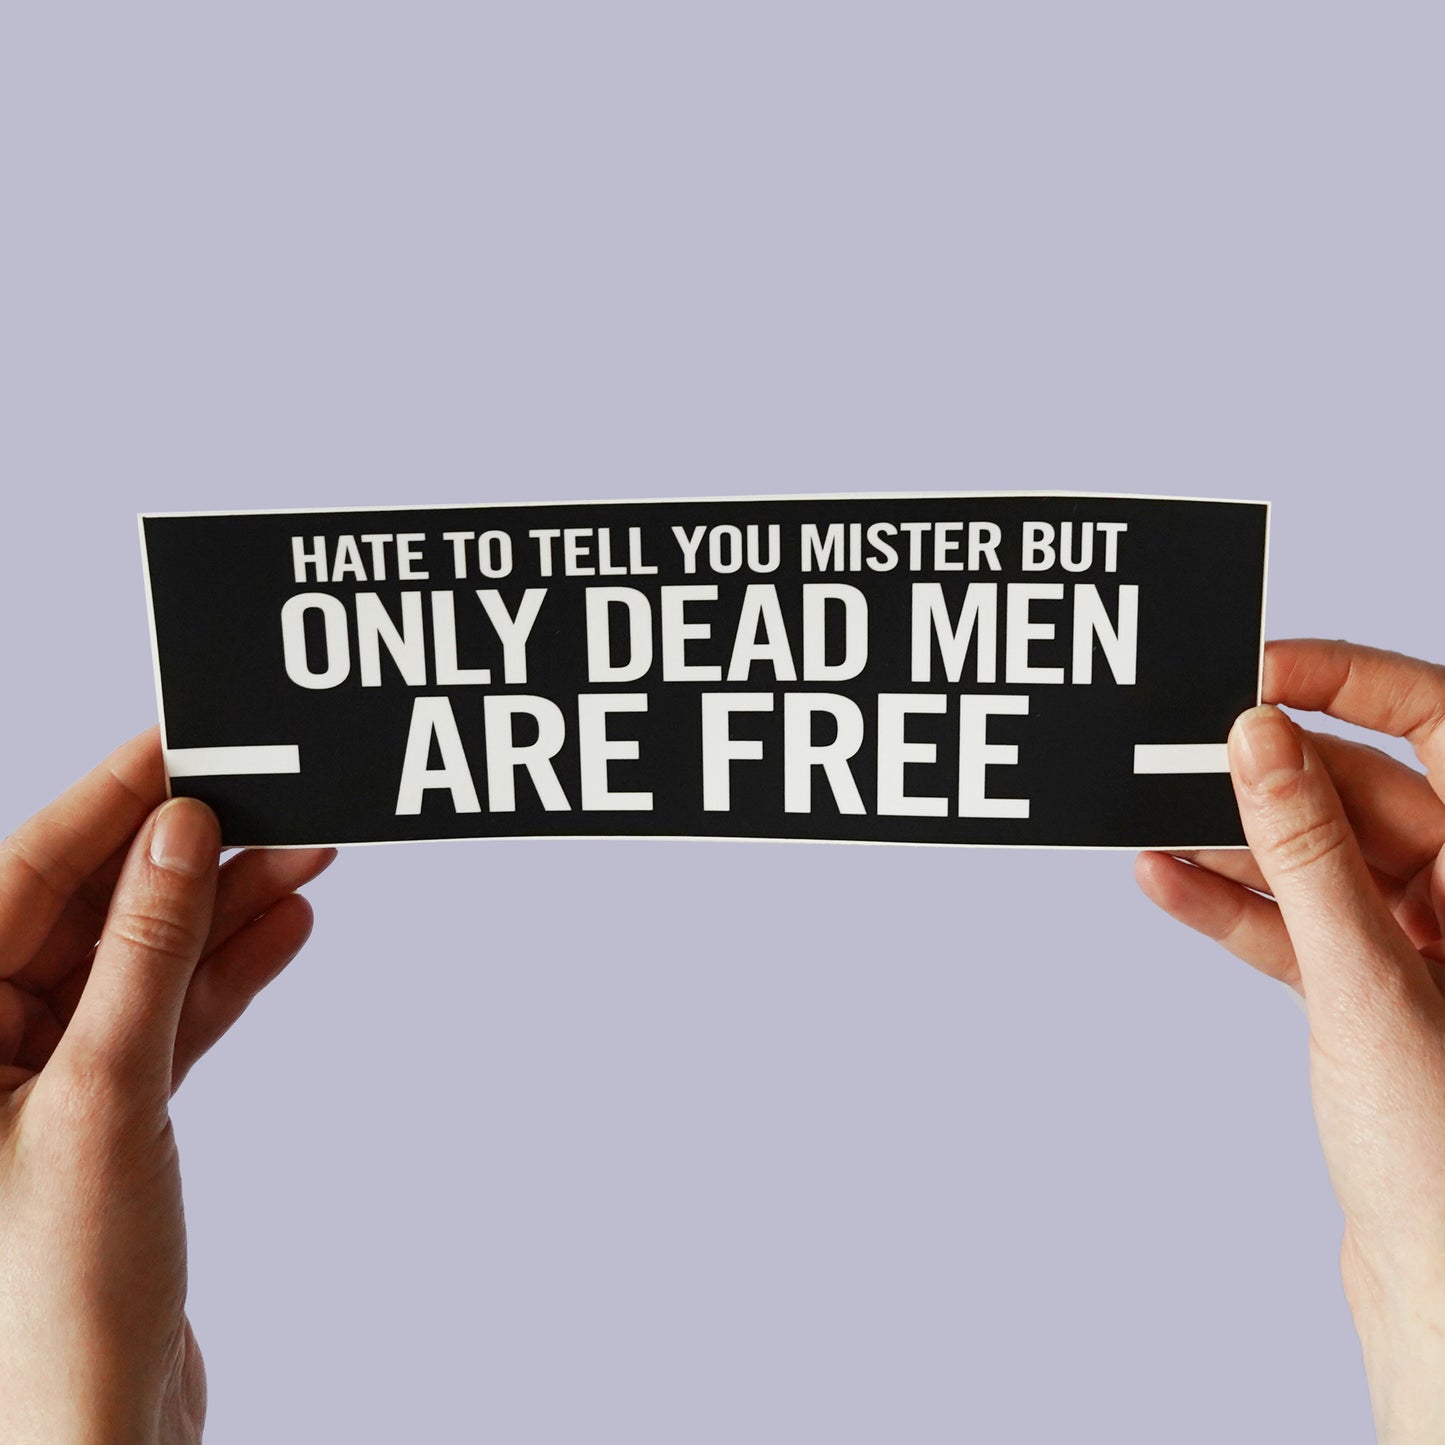 Bob Dylan  "Murder Most Foul" lyric Bumper Sticker!  "I hate to tell you, mister, but only dead men are free"